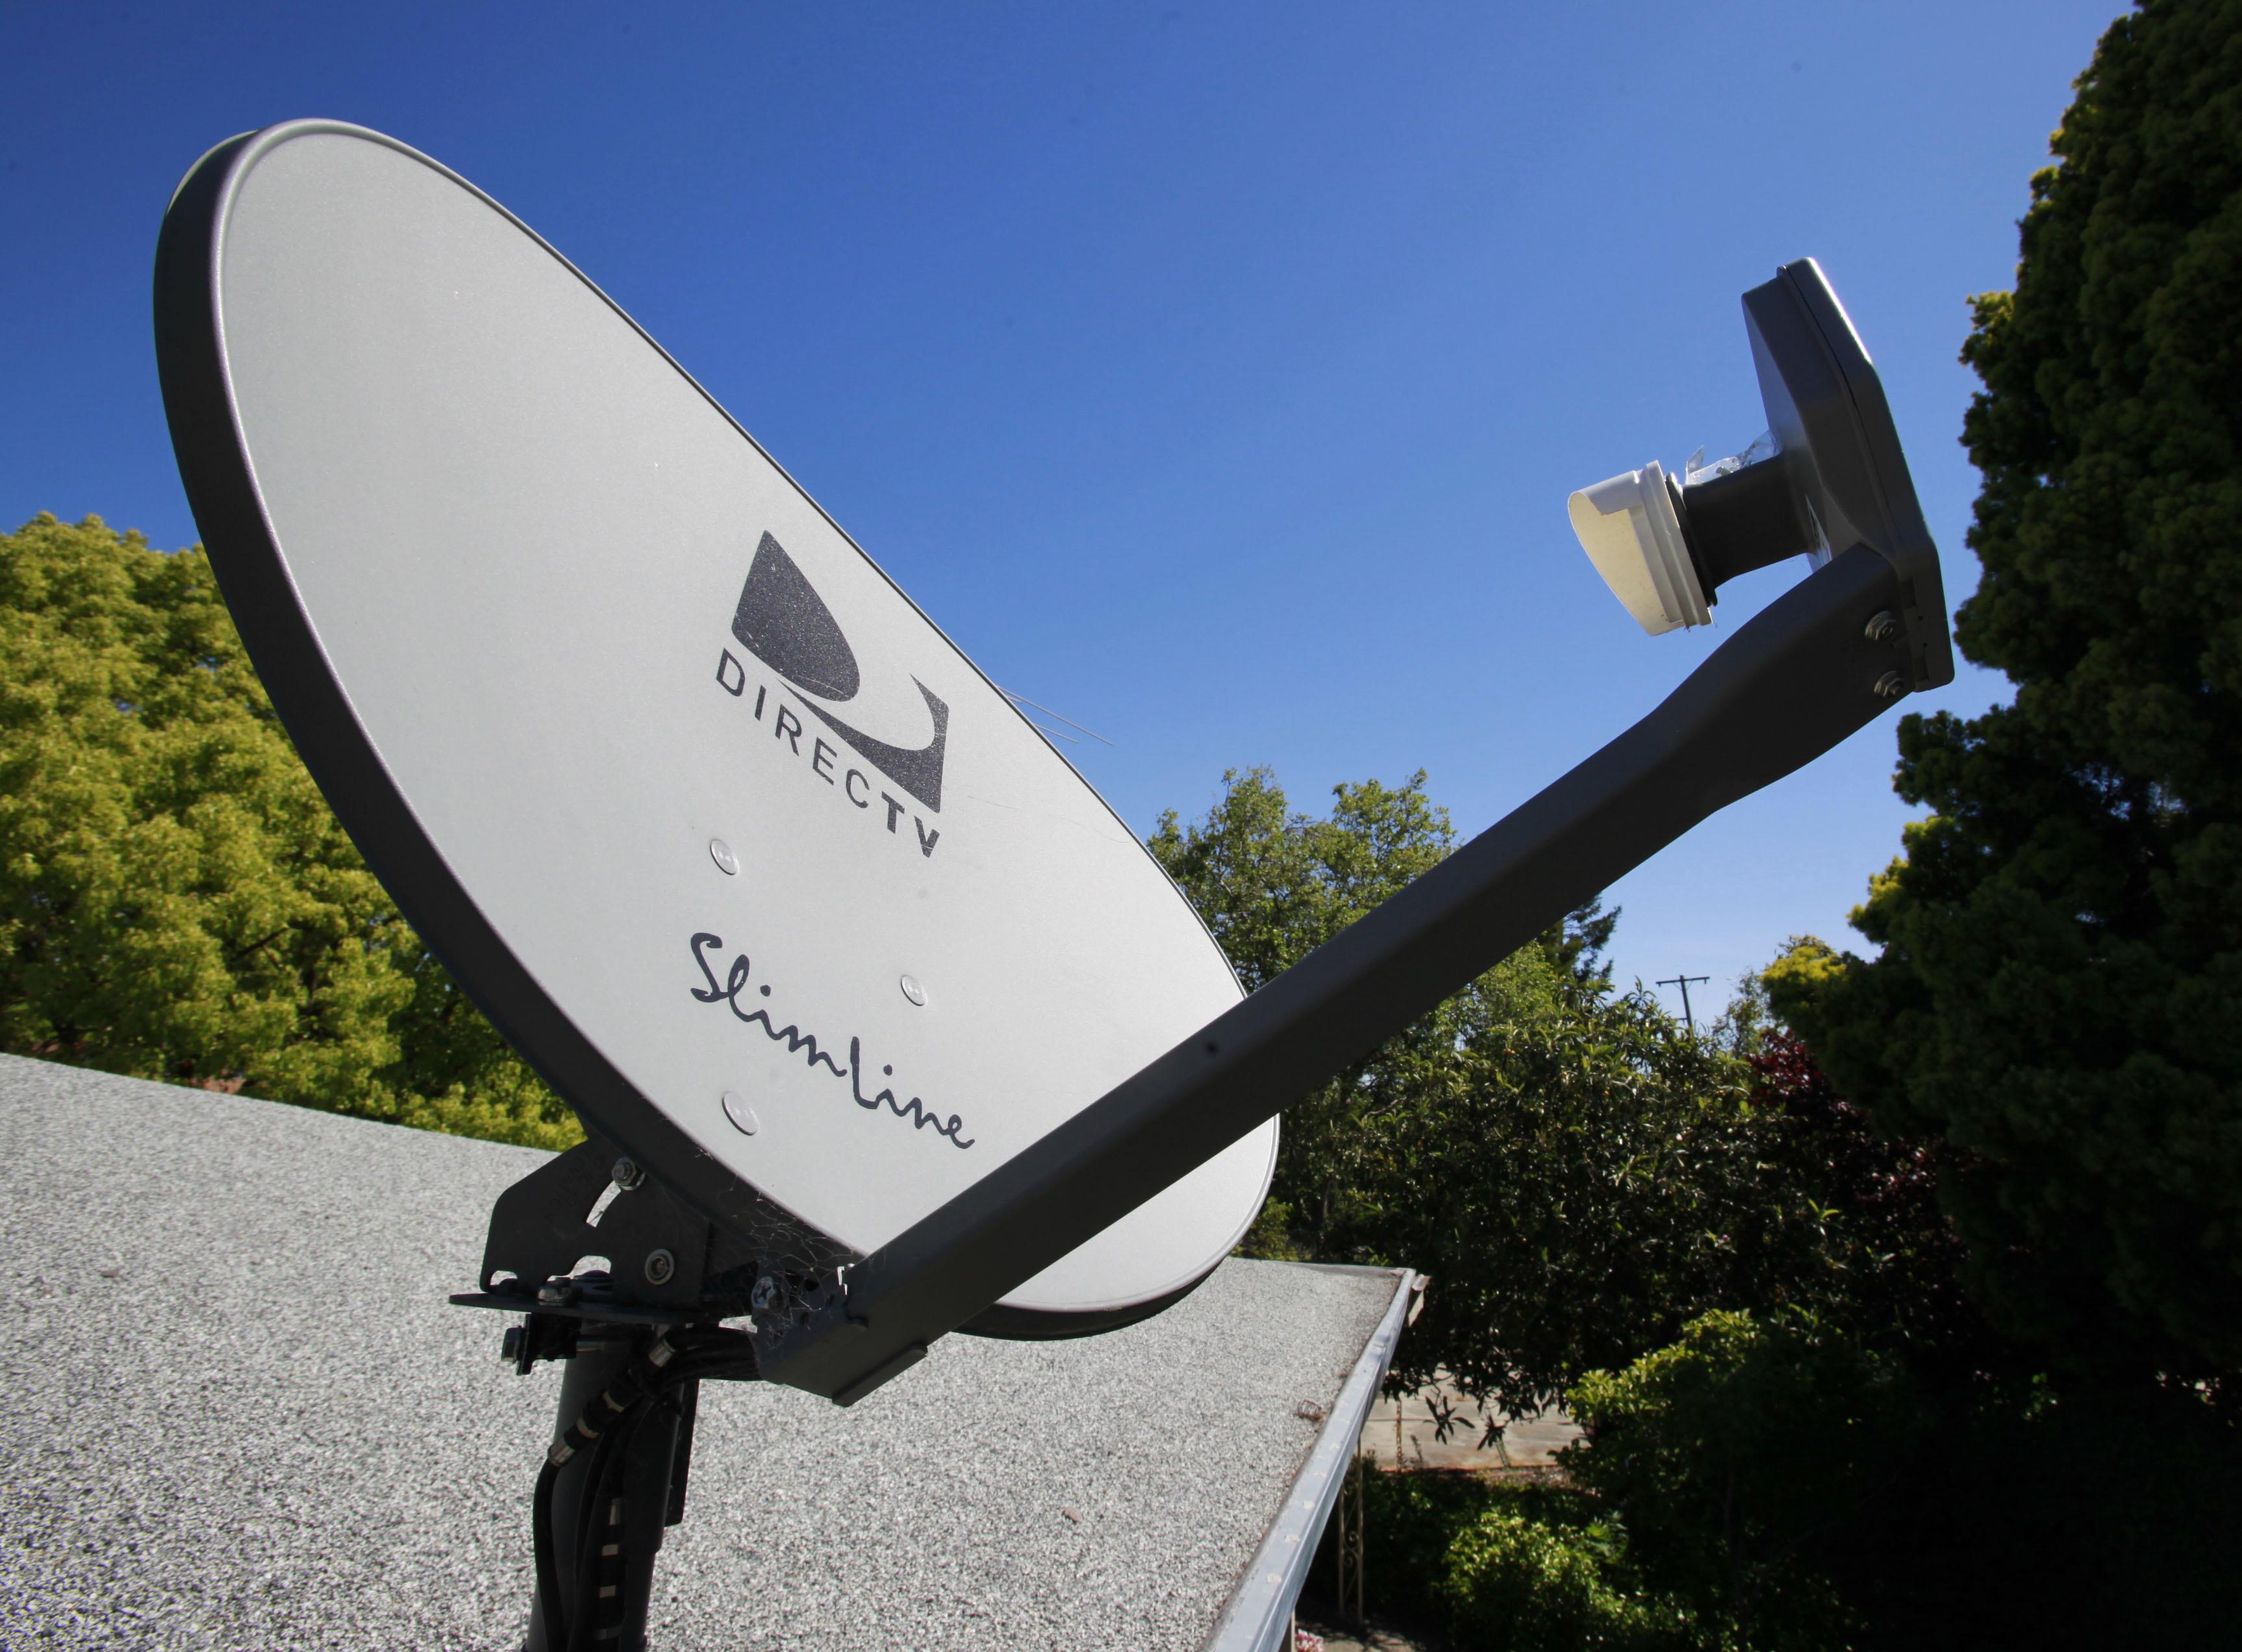 Outrage erupts on right as DirecTV pulls plug on conservative Newsmax network